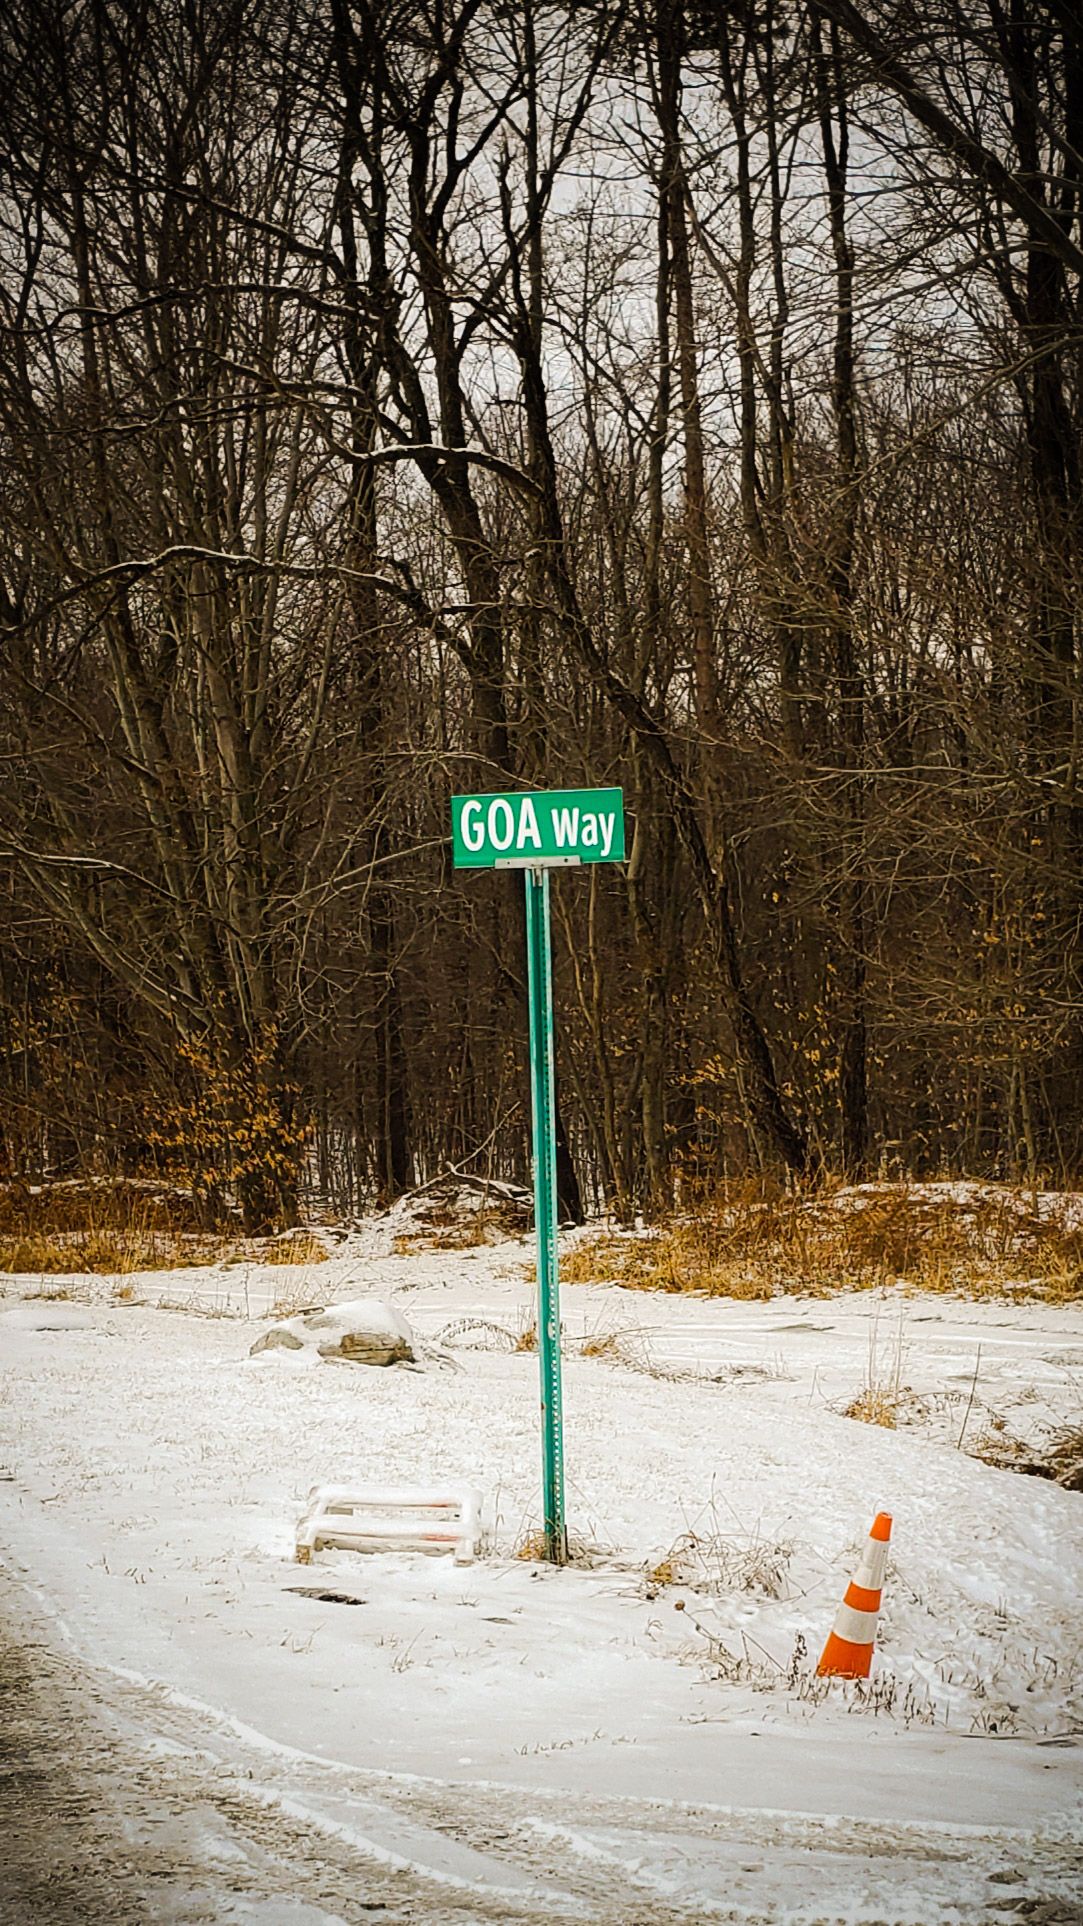 Found this today in a very remote part of my old hometown